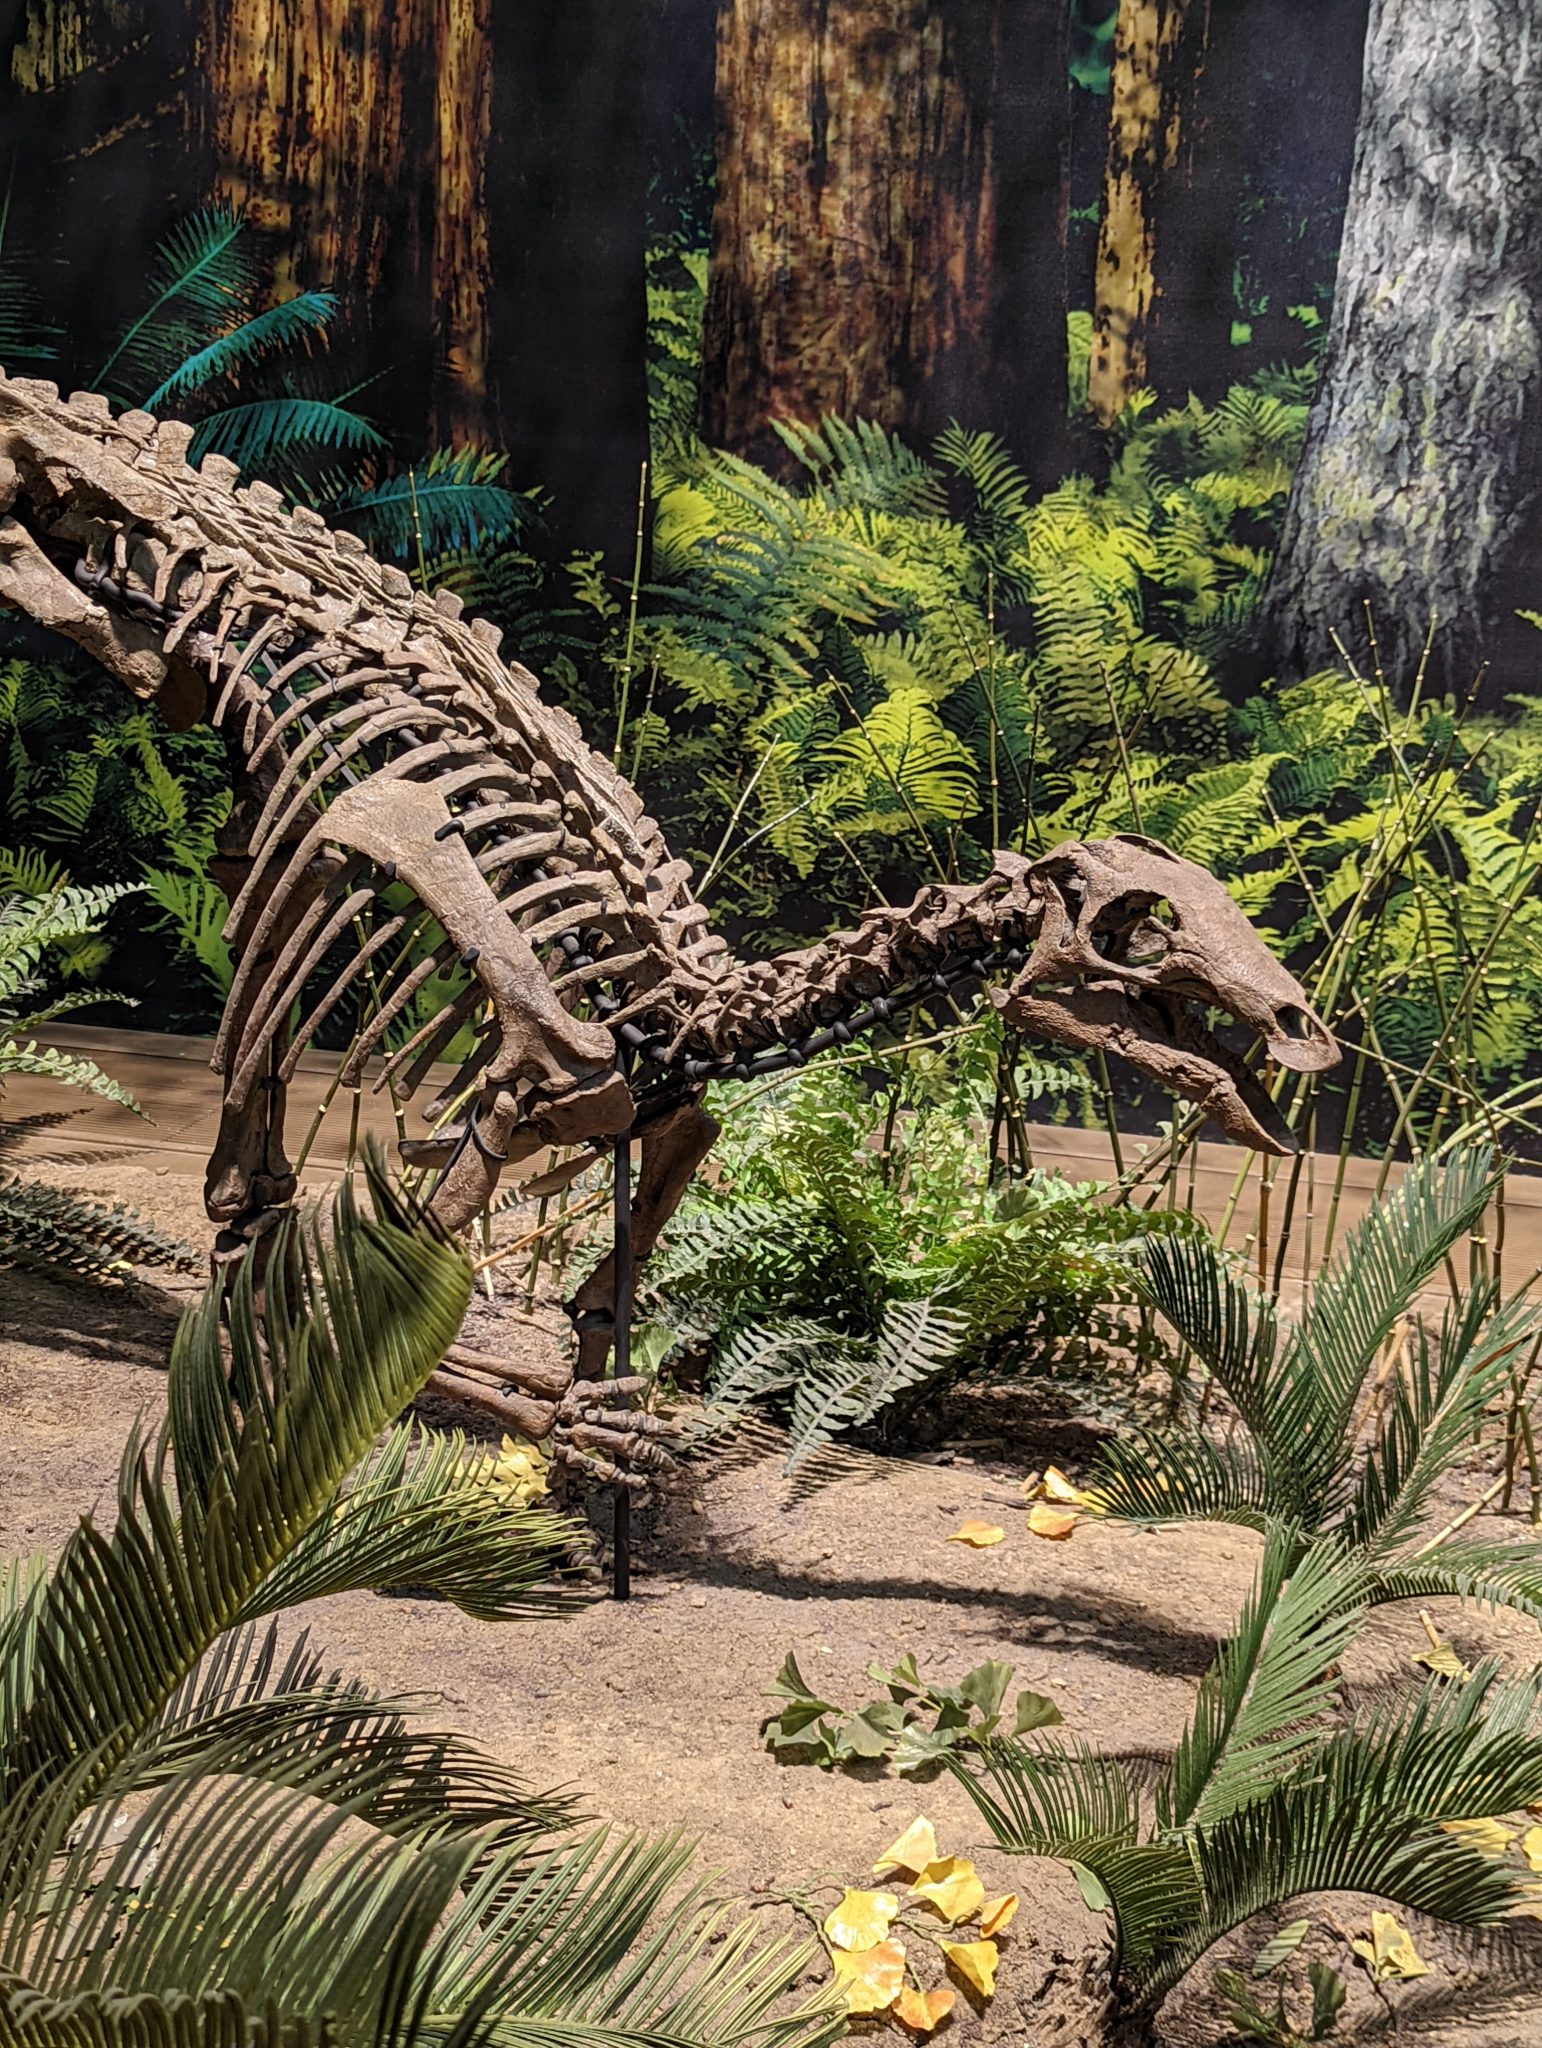 A small dinosaur skeleton on display at Pittsburgh's Carnegie Museum